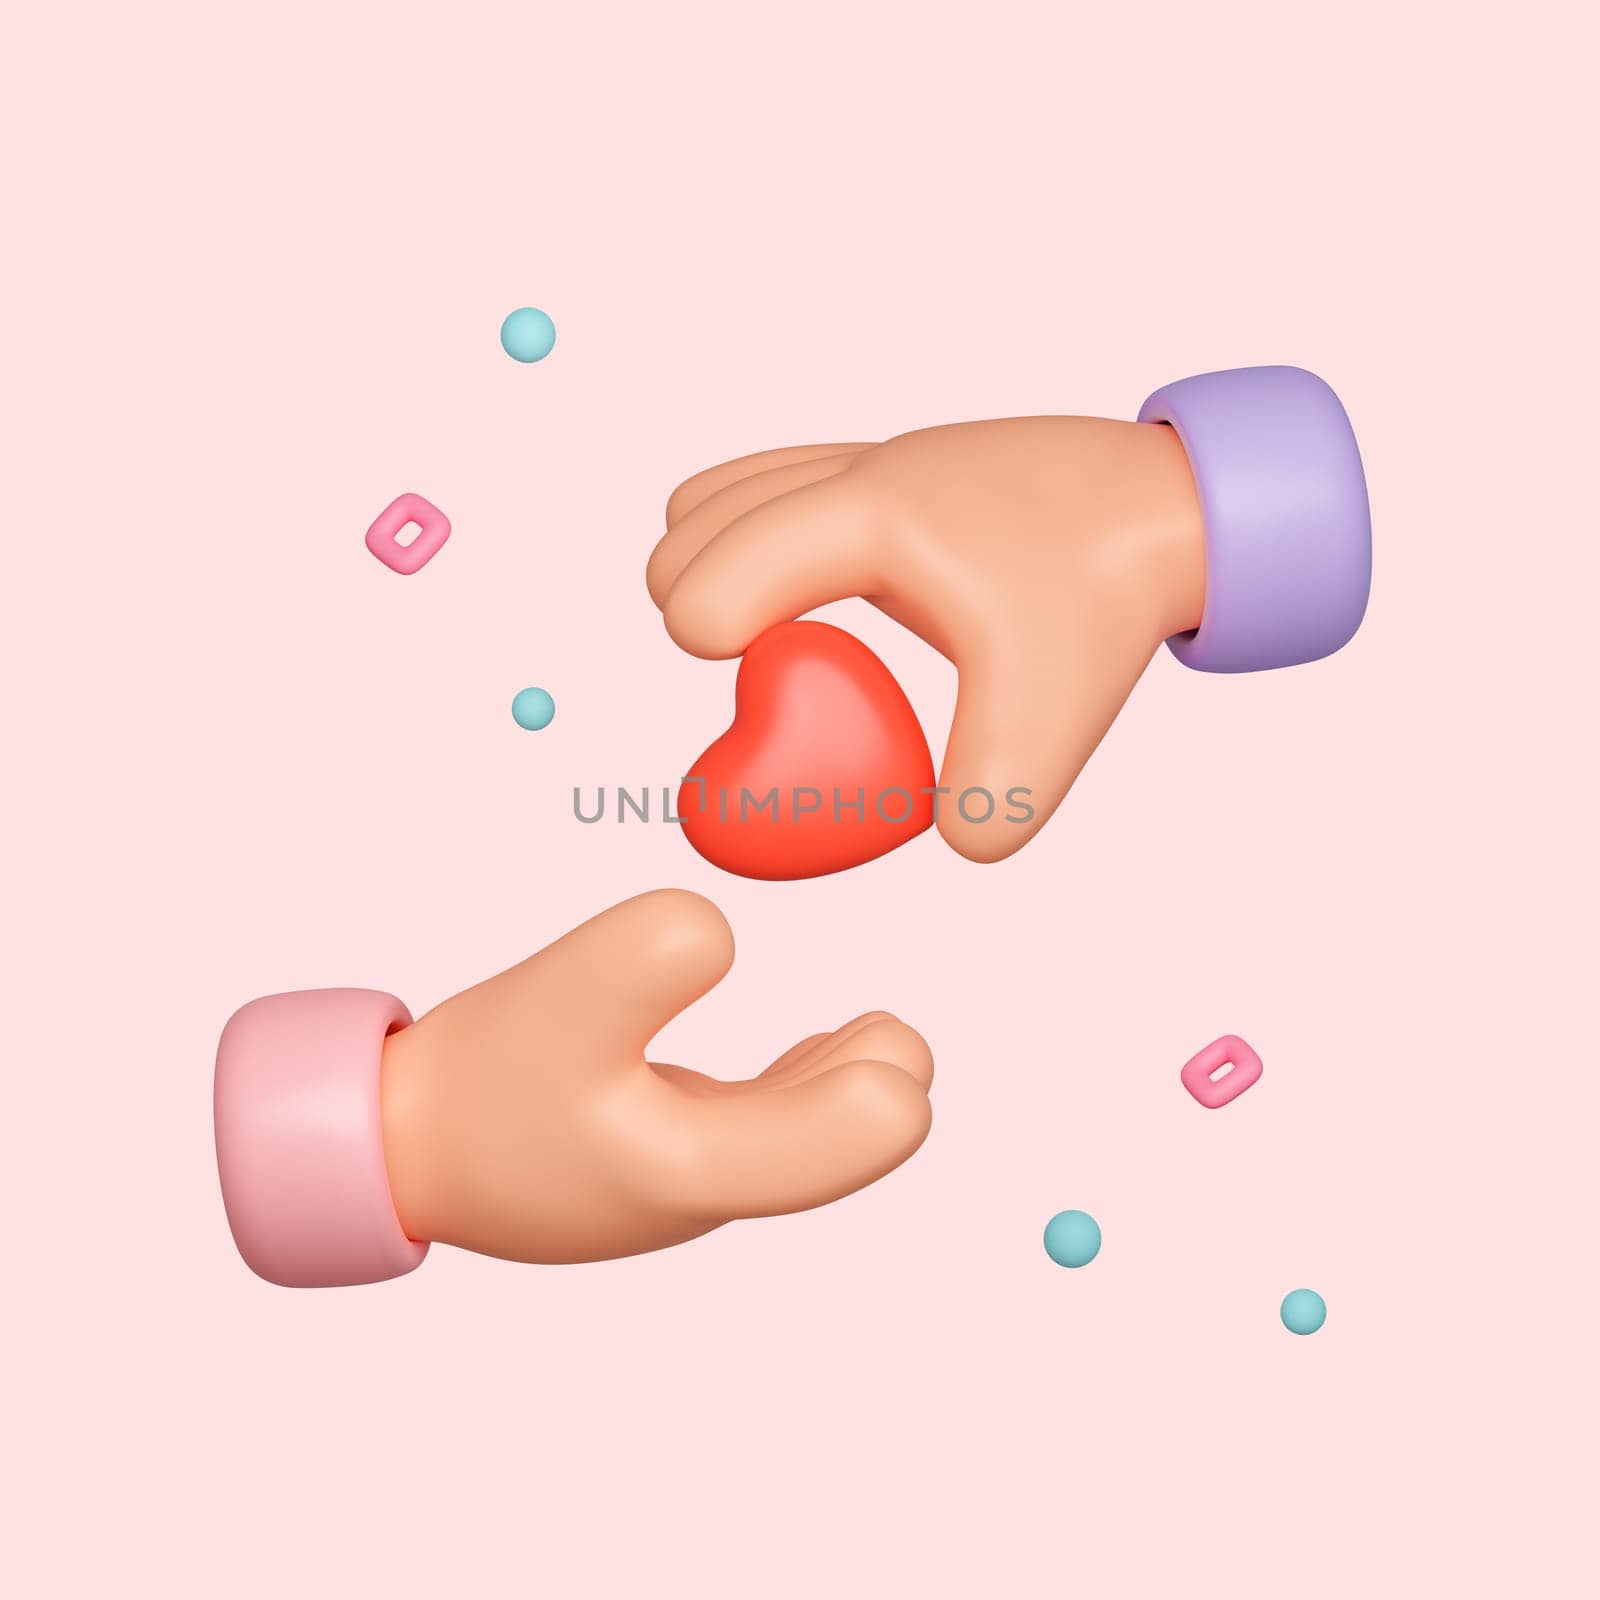 3D cartoon hand give red heart to another isolated on pink background with clipping path. Social media concept. 3d render illustration by meepiangraphic